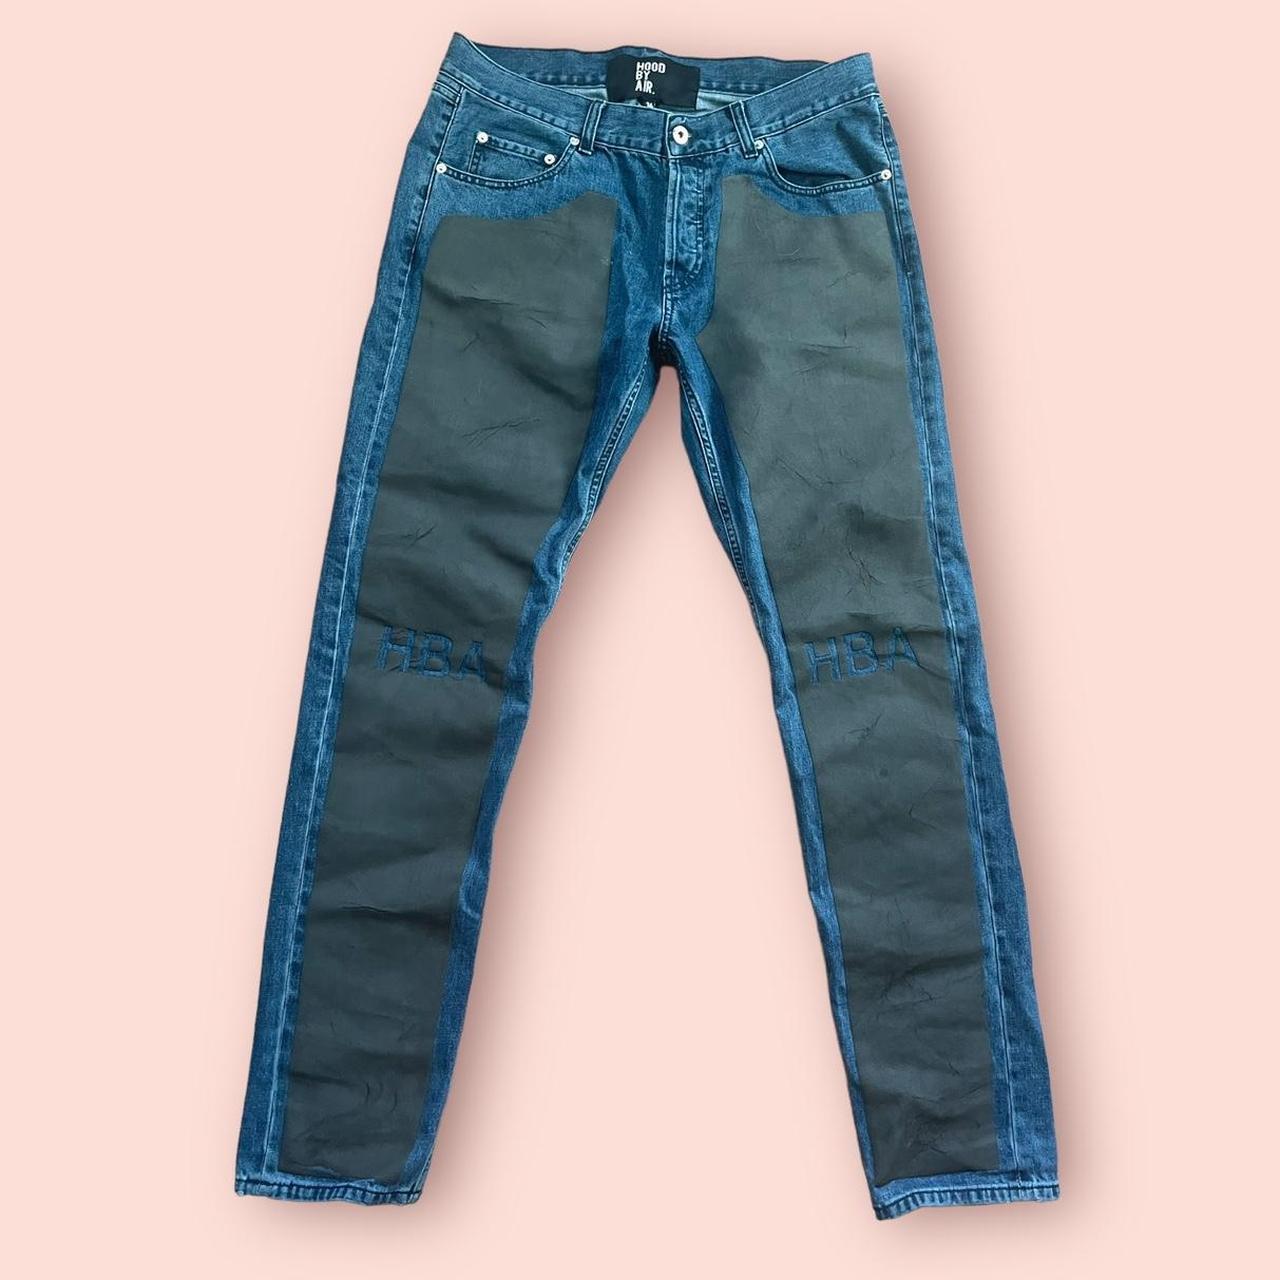 Hood By Air Men's Blue and Black Jeans